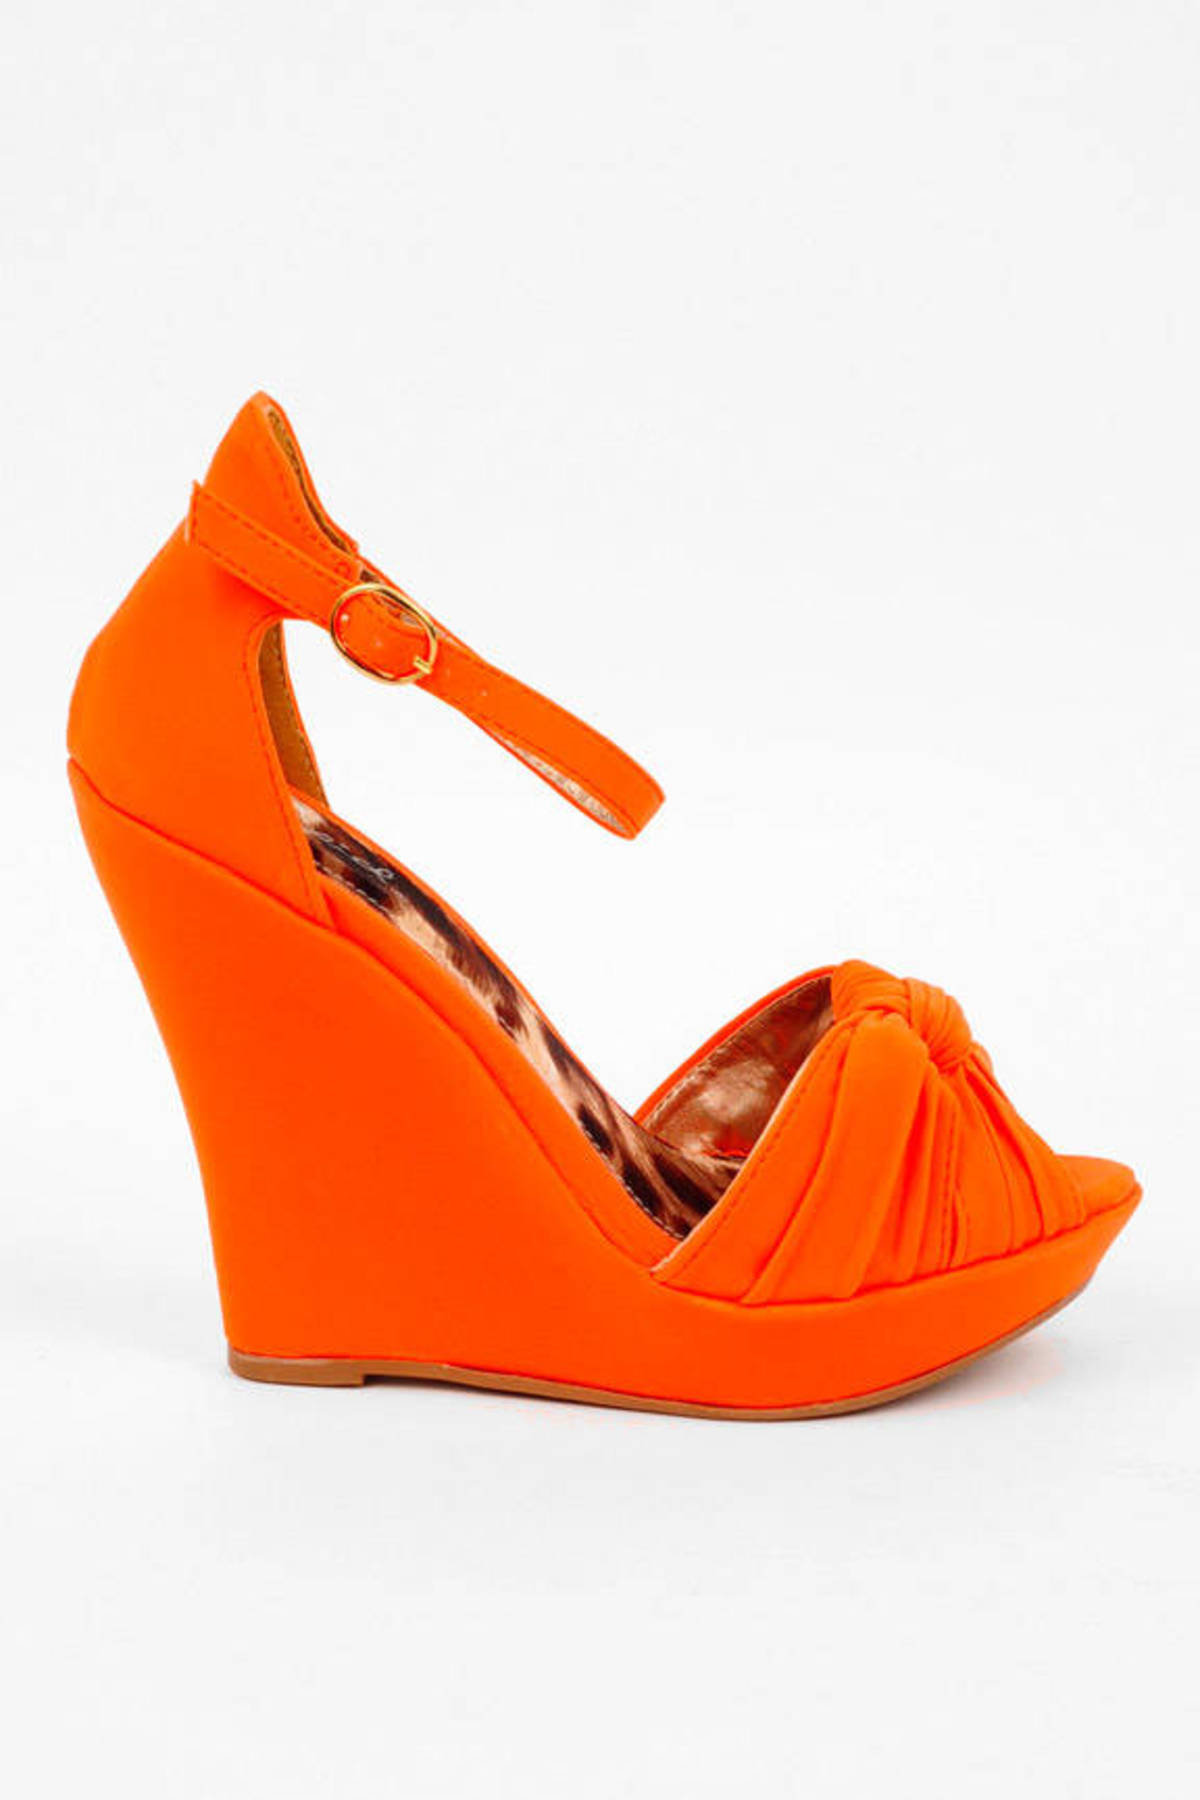 Ceduce Knotted Wedges in Neon Orange - $19 | Tobi US